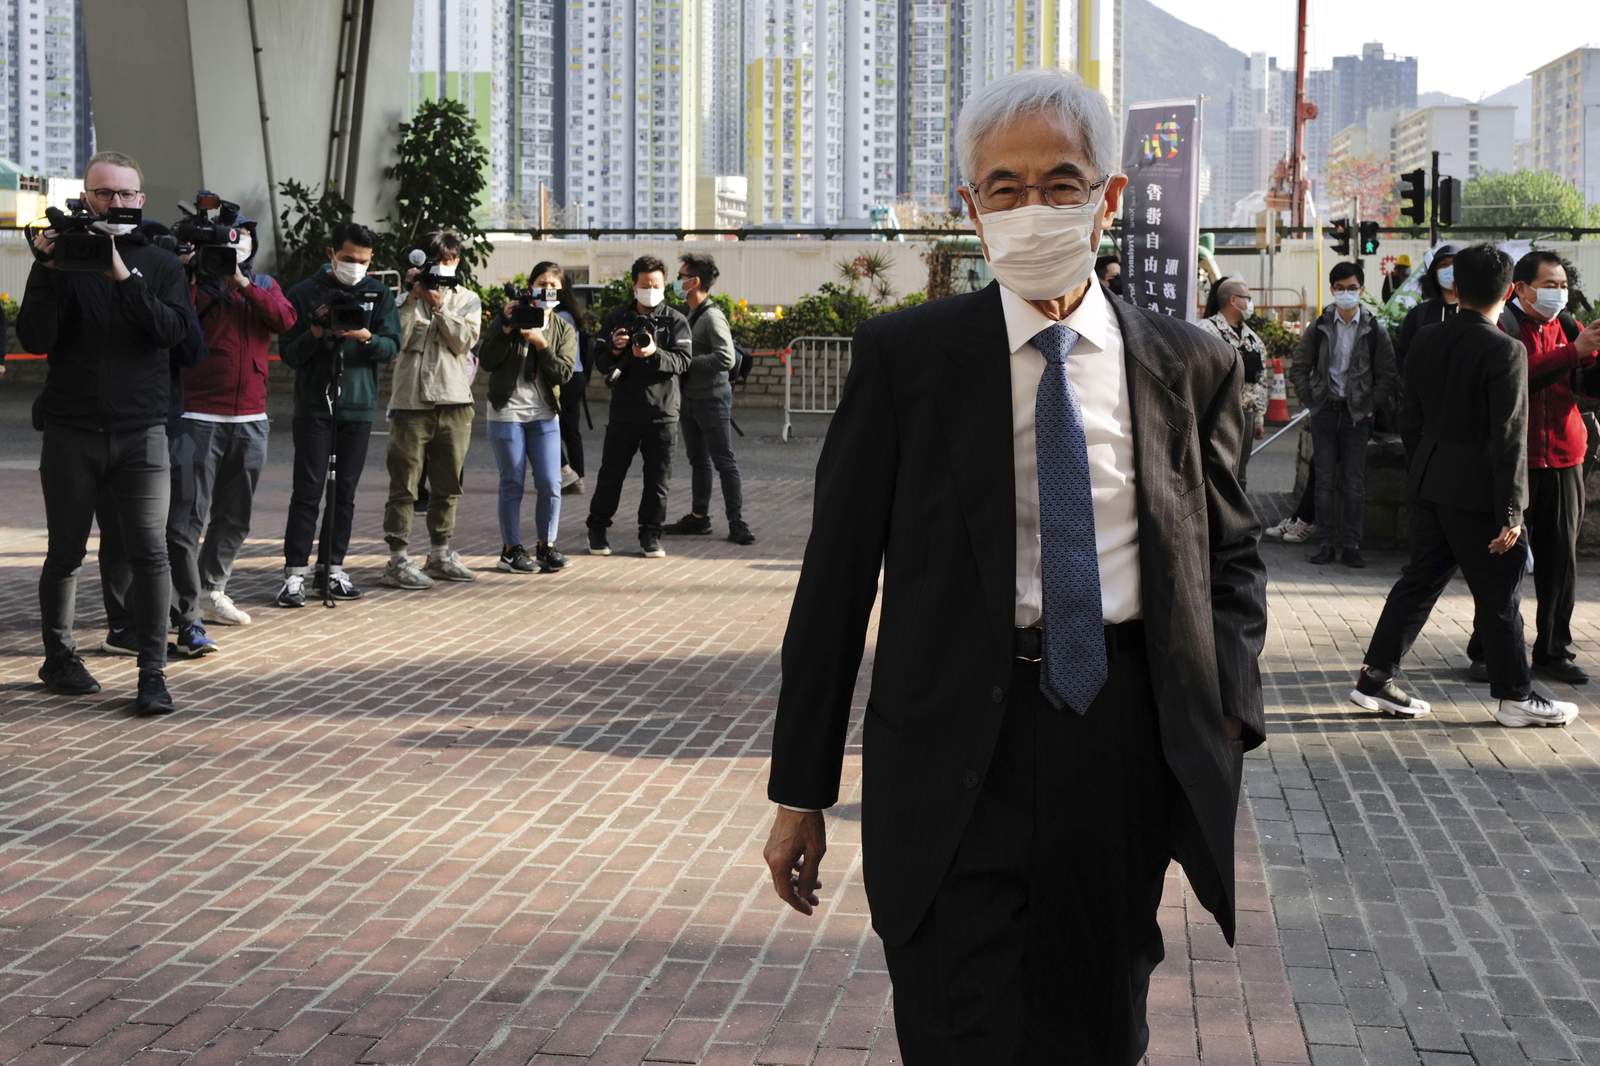 2 plead guilty as leading Hong Kong activists go on trial